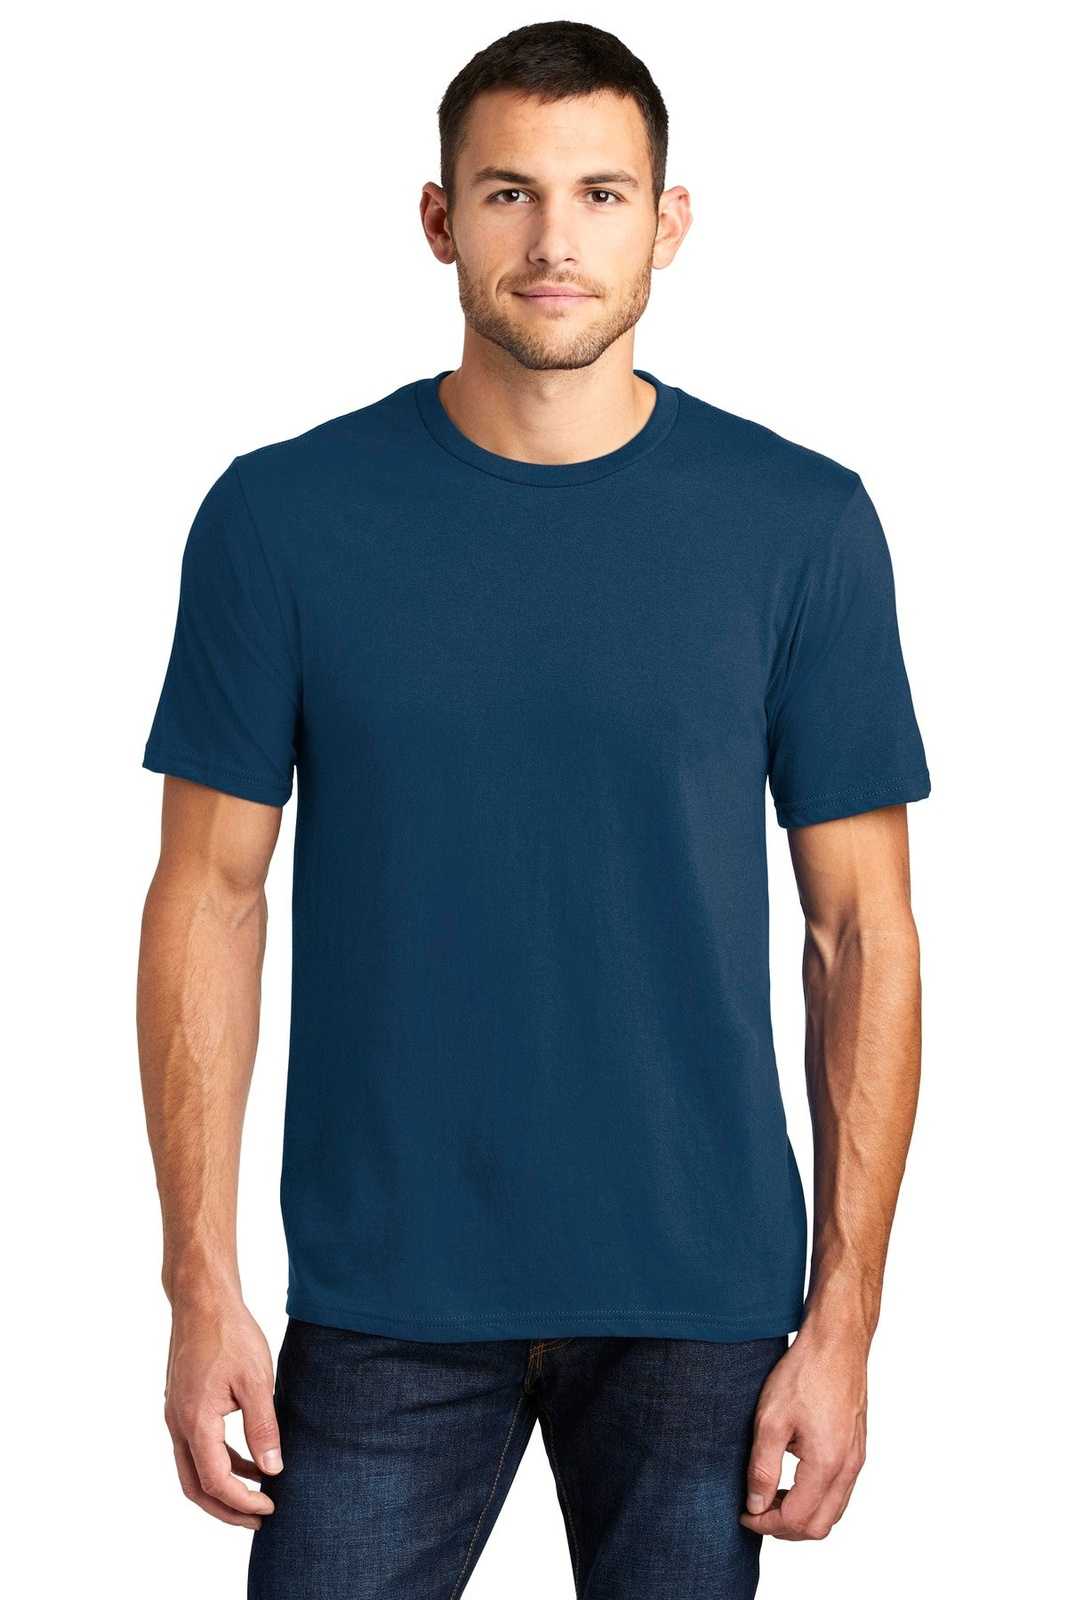 District DT6000 Very Important Tee - Neptune Blue - HIT a Double - 1